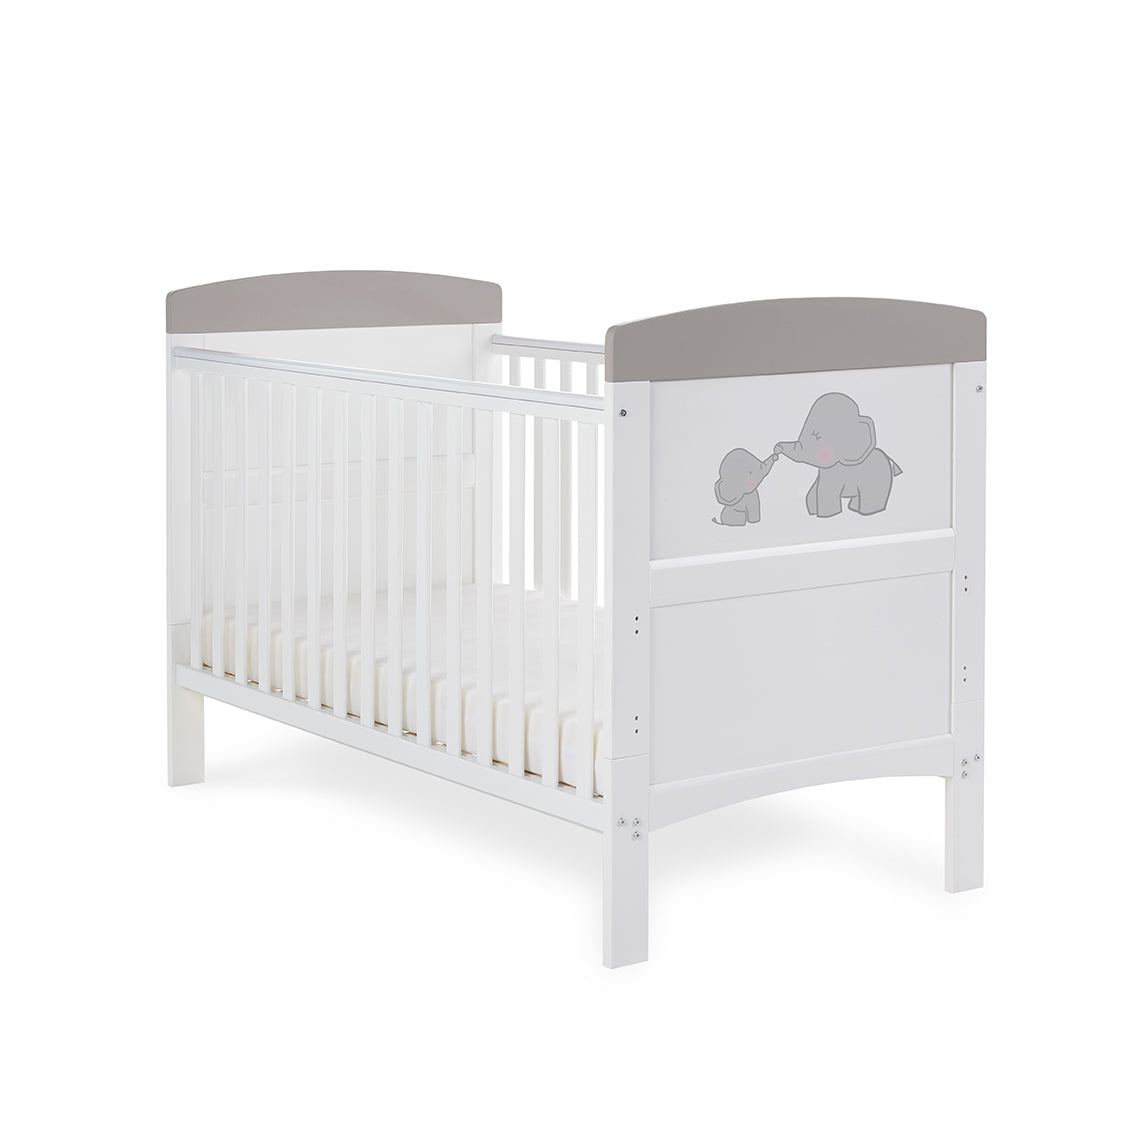 Obaby Grace Inspire Cot Bed & Fibre Mattress – Me & Mini Me Elephants – Grey -  | For Your Little One